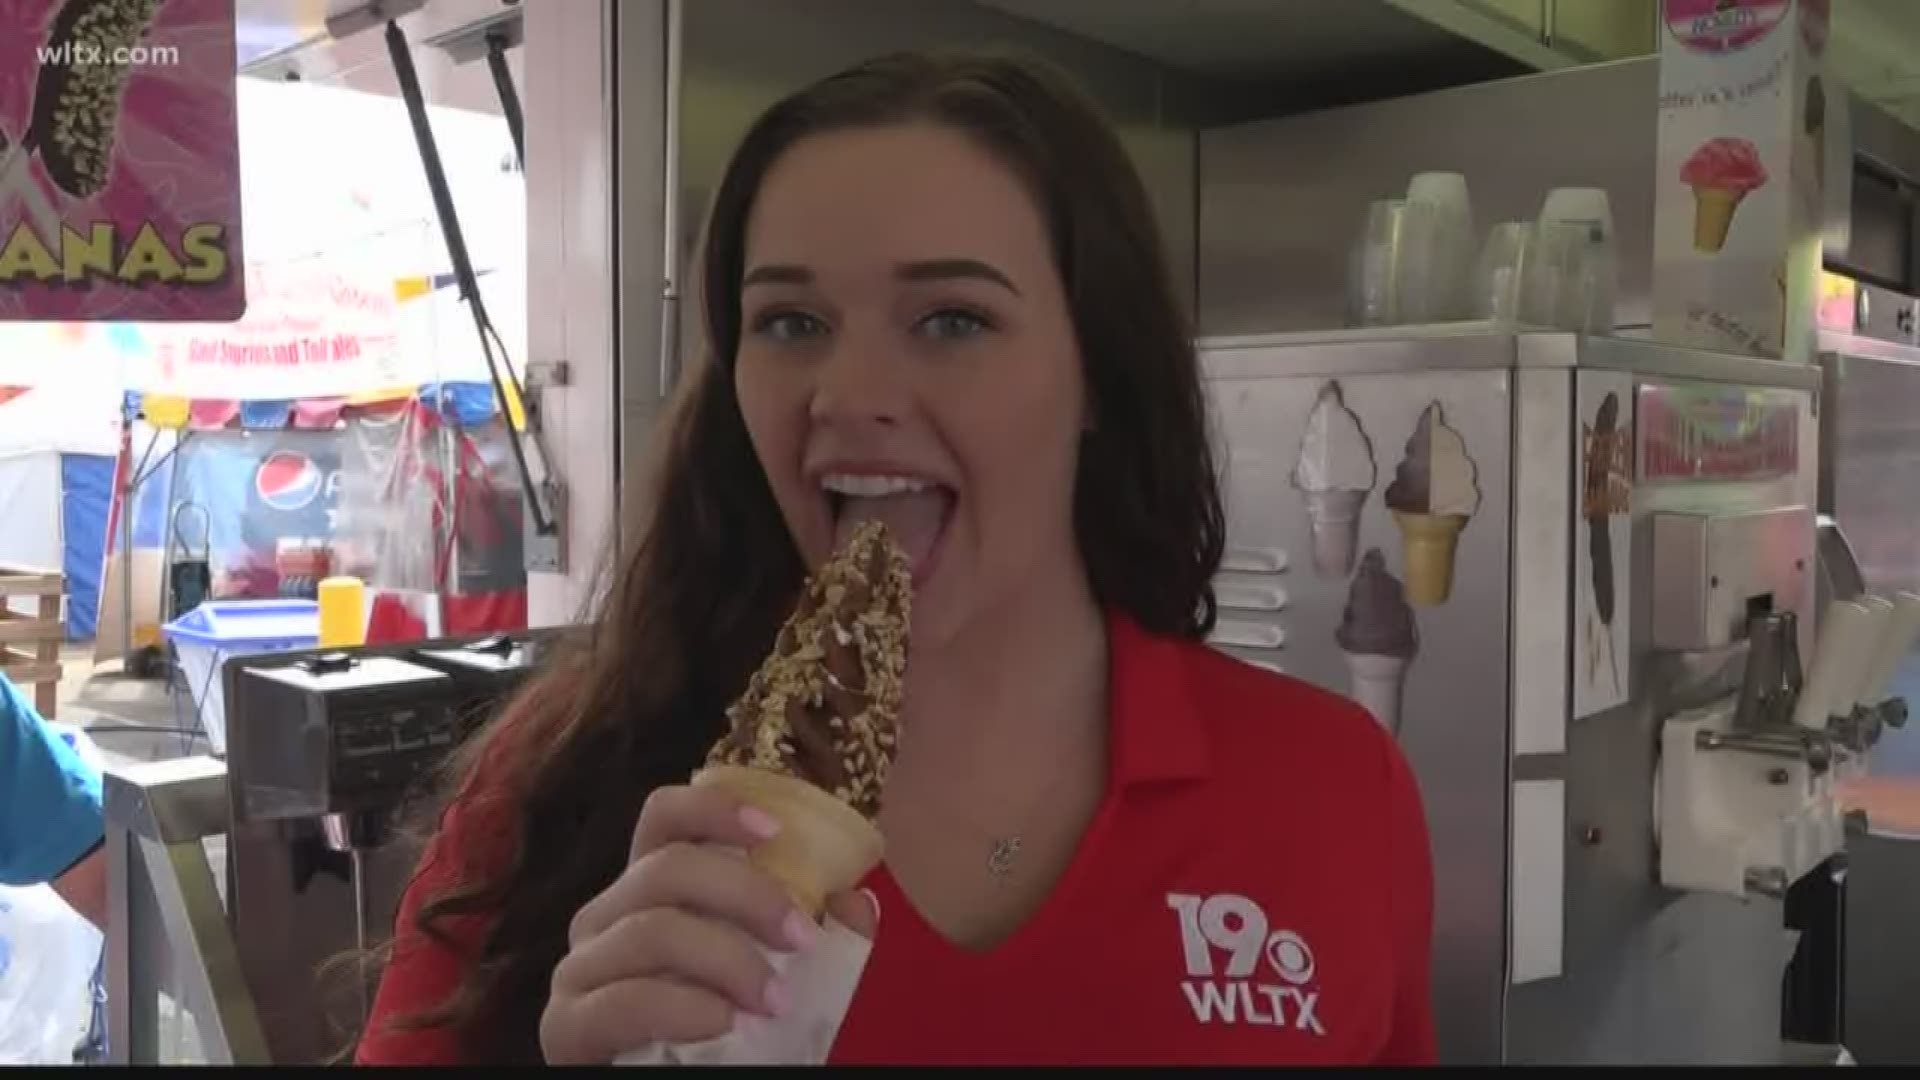 At the South Carolina State Fair, you can get the Columbia Special dairy cone. That's vanilla ice cream dipped in chocolate and rolled in peanuts.